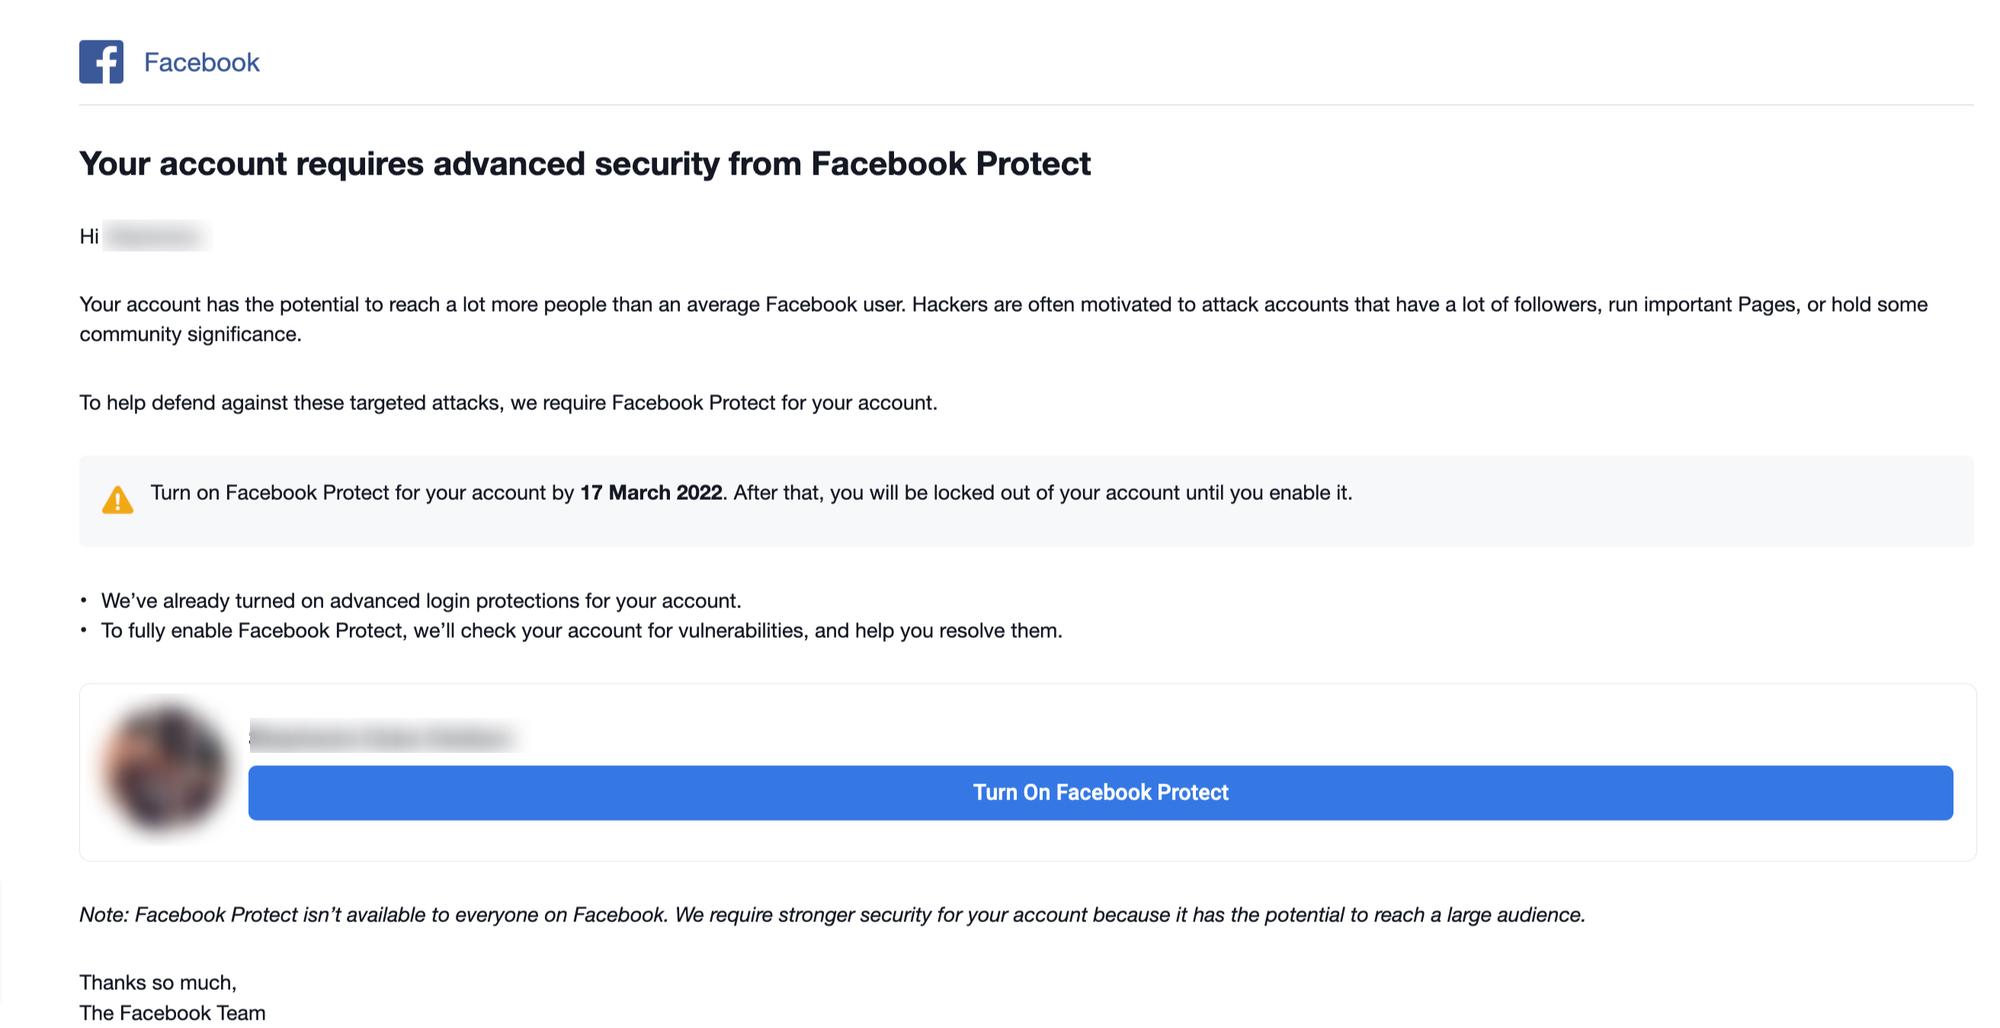 Facebook users must turn on this feature to not be locked out of their accounts - Photo 2.